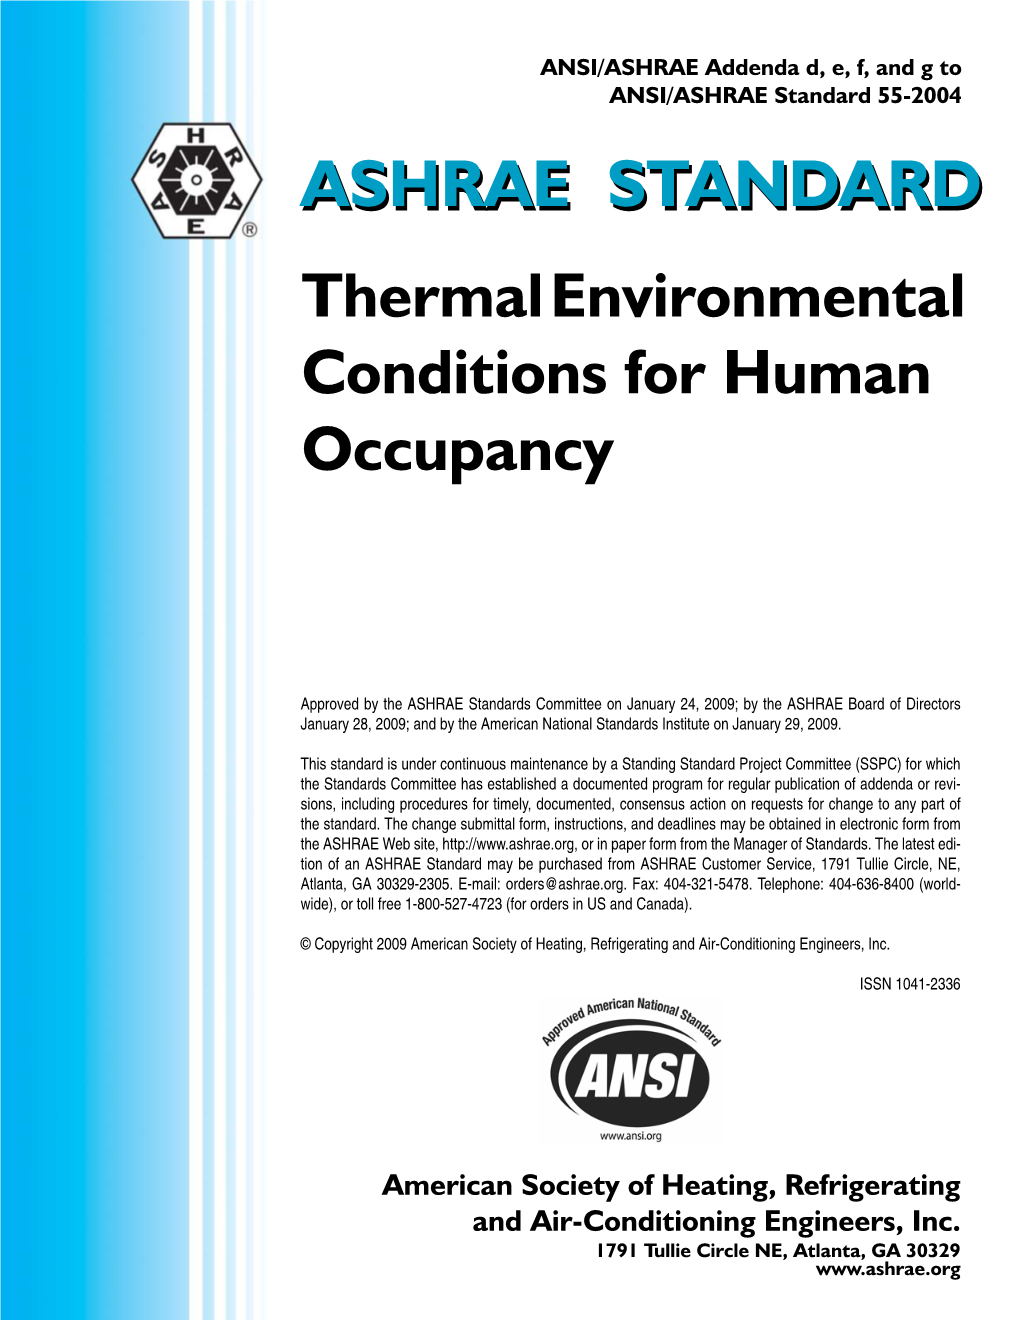 Addenda D, E, F, and G to ANSI/ASHRAE Standard 55-2004 ASHRAEASHRAE STANDARDSTANDARD Thermal Environmental Conditions for Human Occupancy